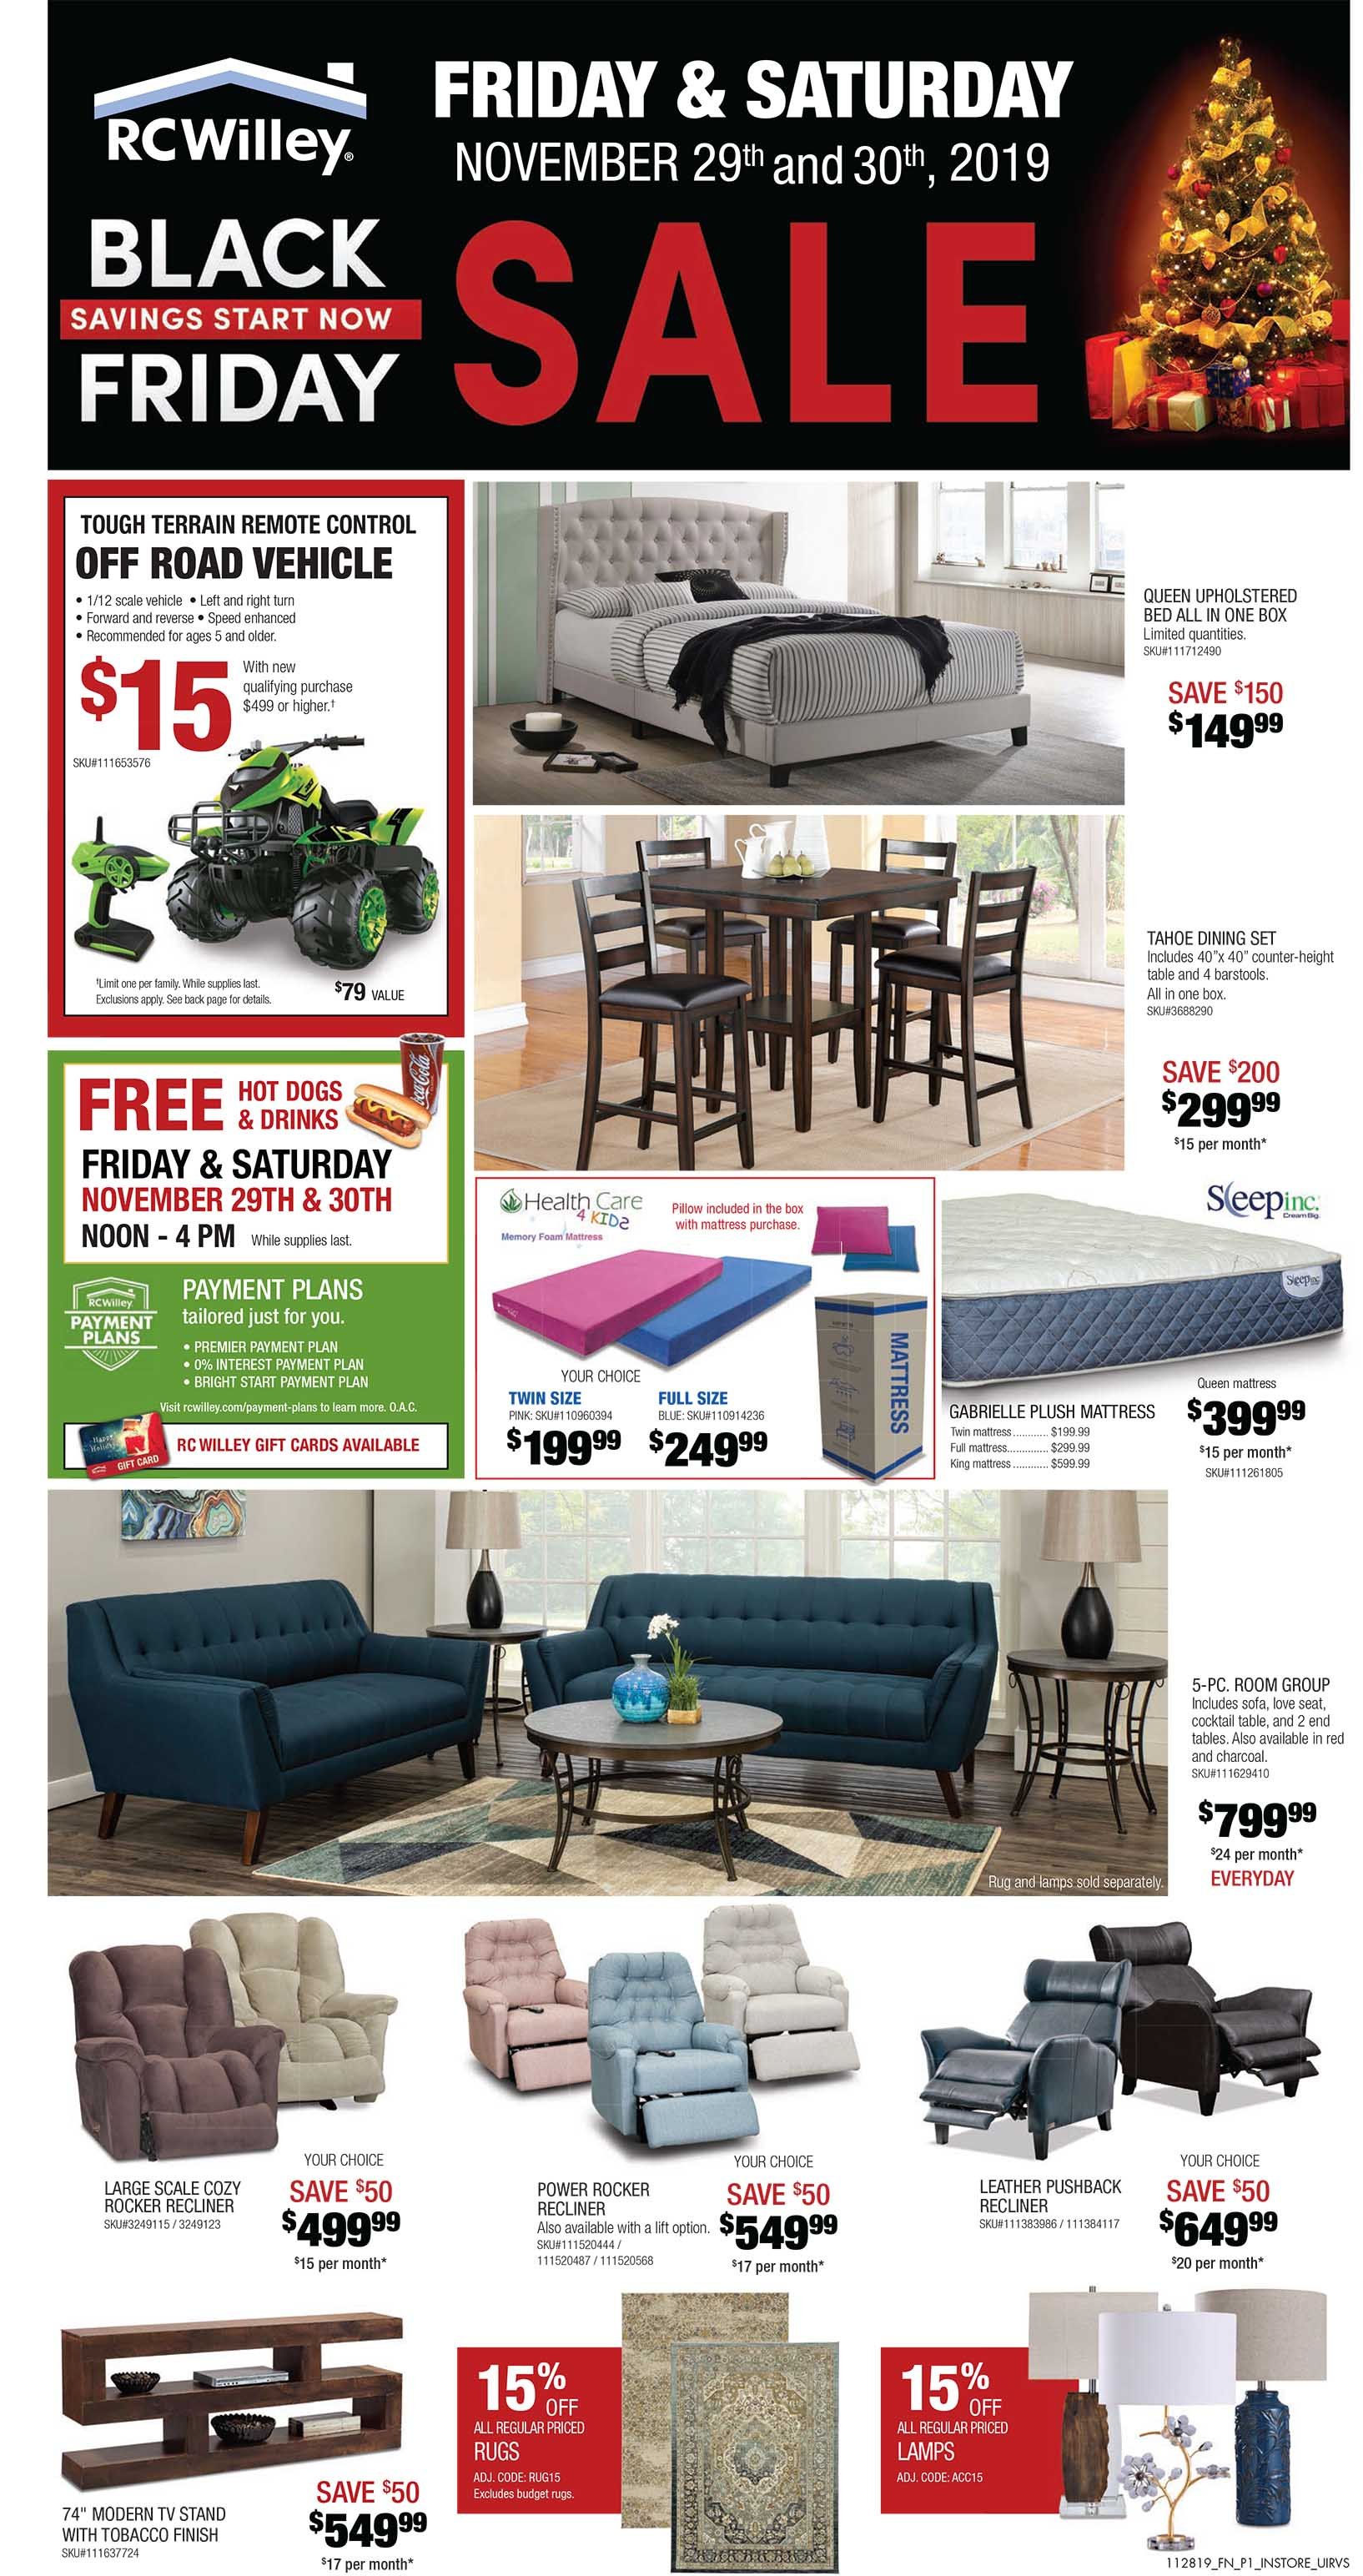 RC Willey's Black Friday Furniture Sale is Finally Here! Plus DOORBUSTERS!!